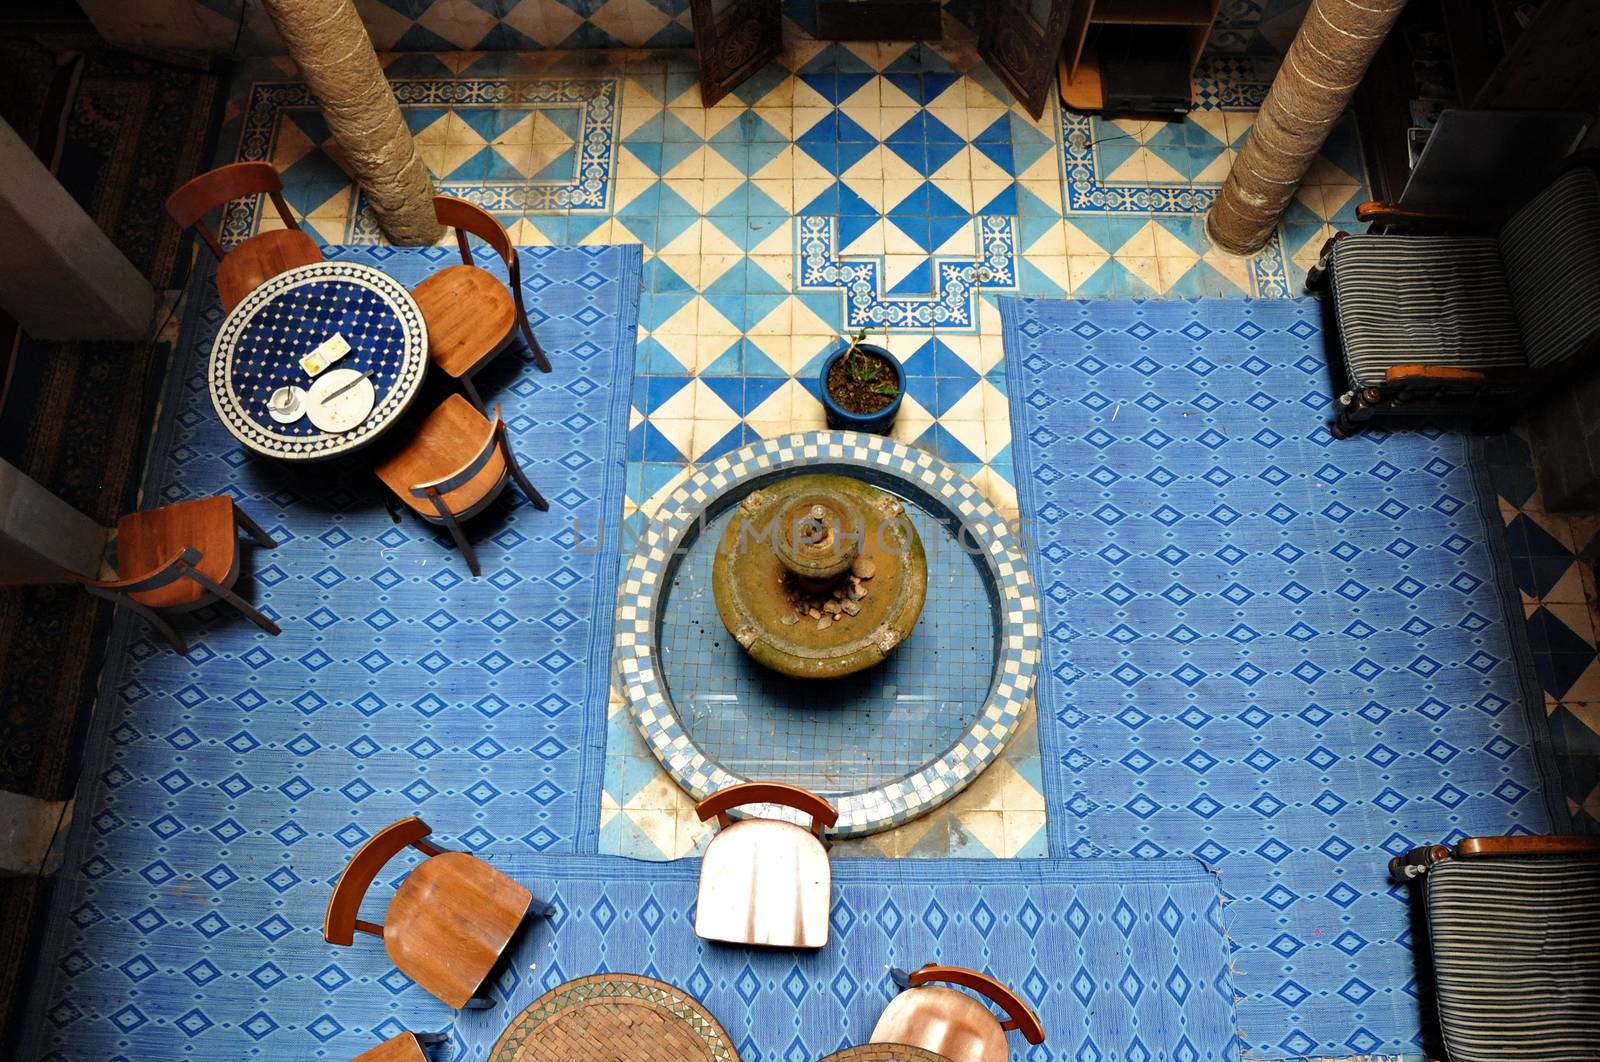 ESSAOUIRA - SEPTEMBER 29: Inside part of a typical accommodation called : "Riad" in Essaouira, Morocco, September 29, 2013.